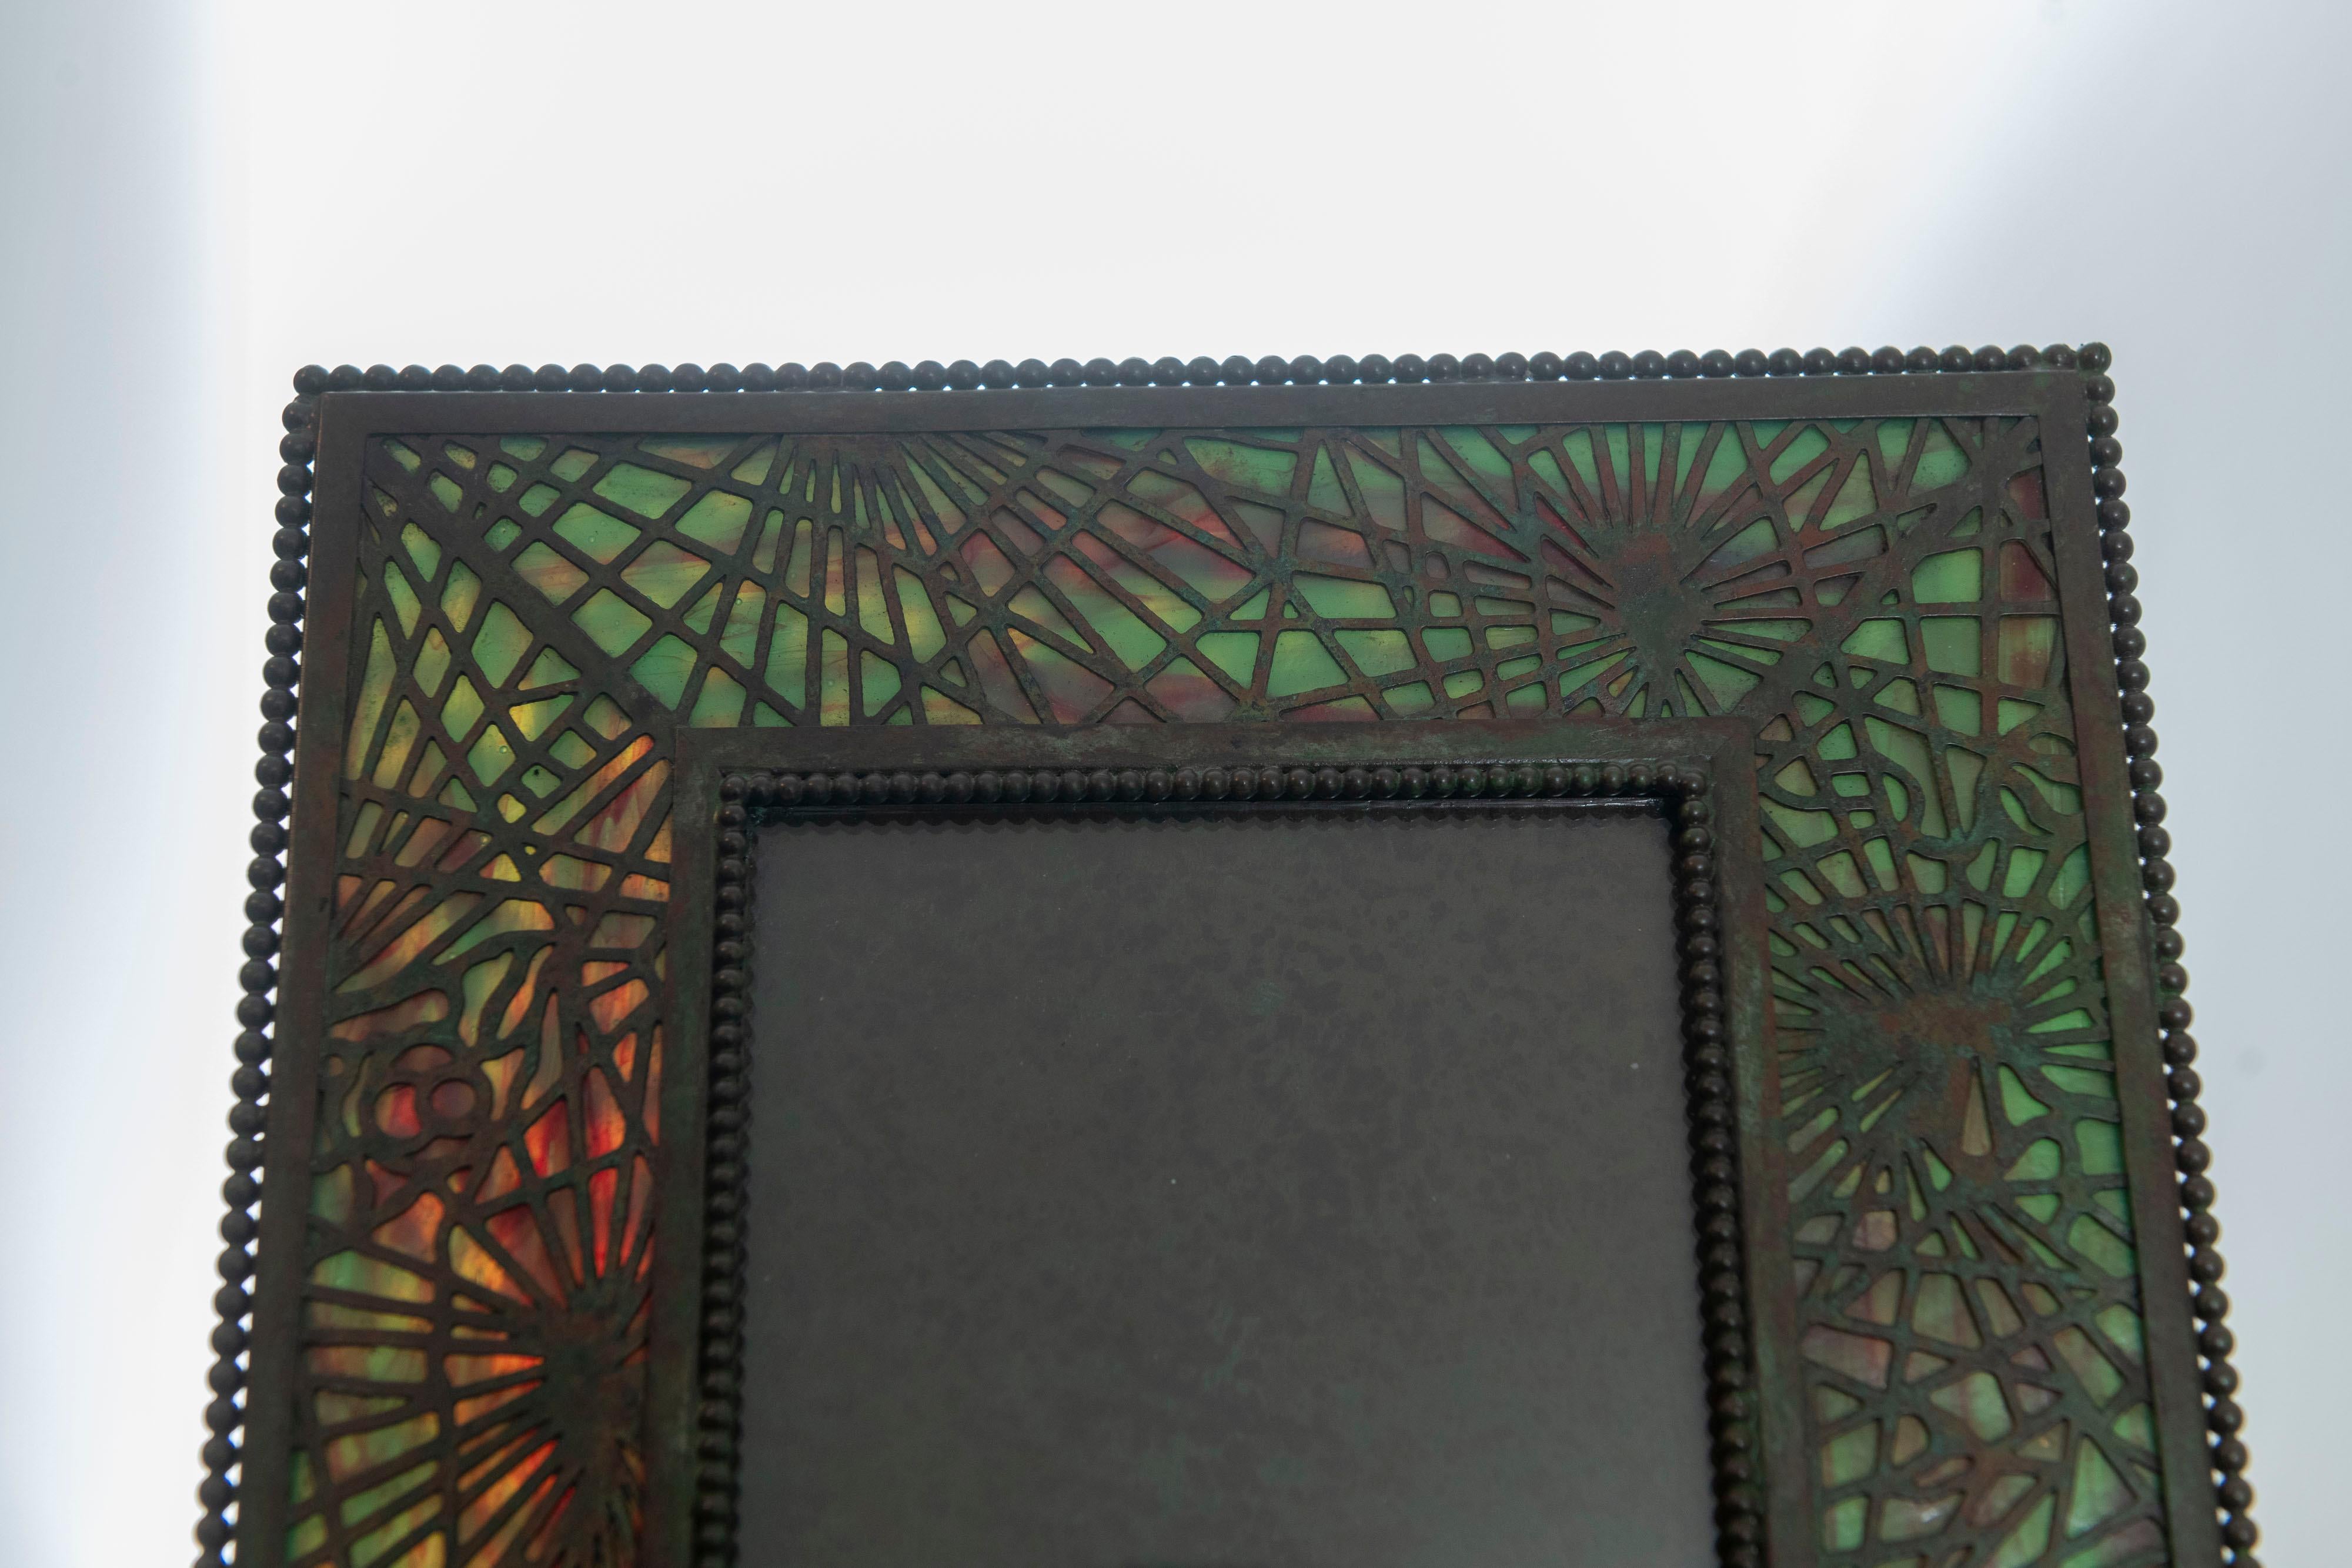 Early 20th Century Antique Picture Frame, Signed Tiffany Studios, Pine Needle Design, ca. 1905